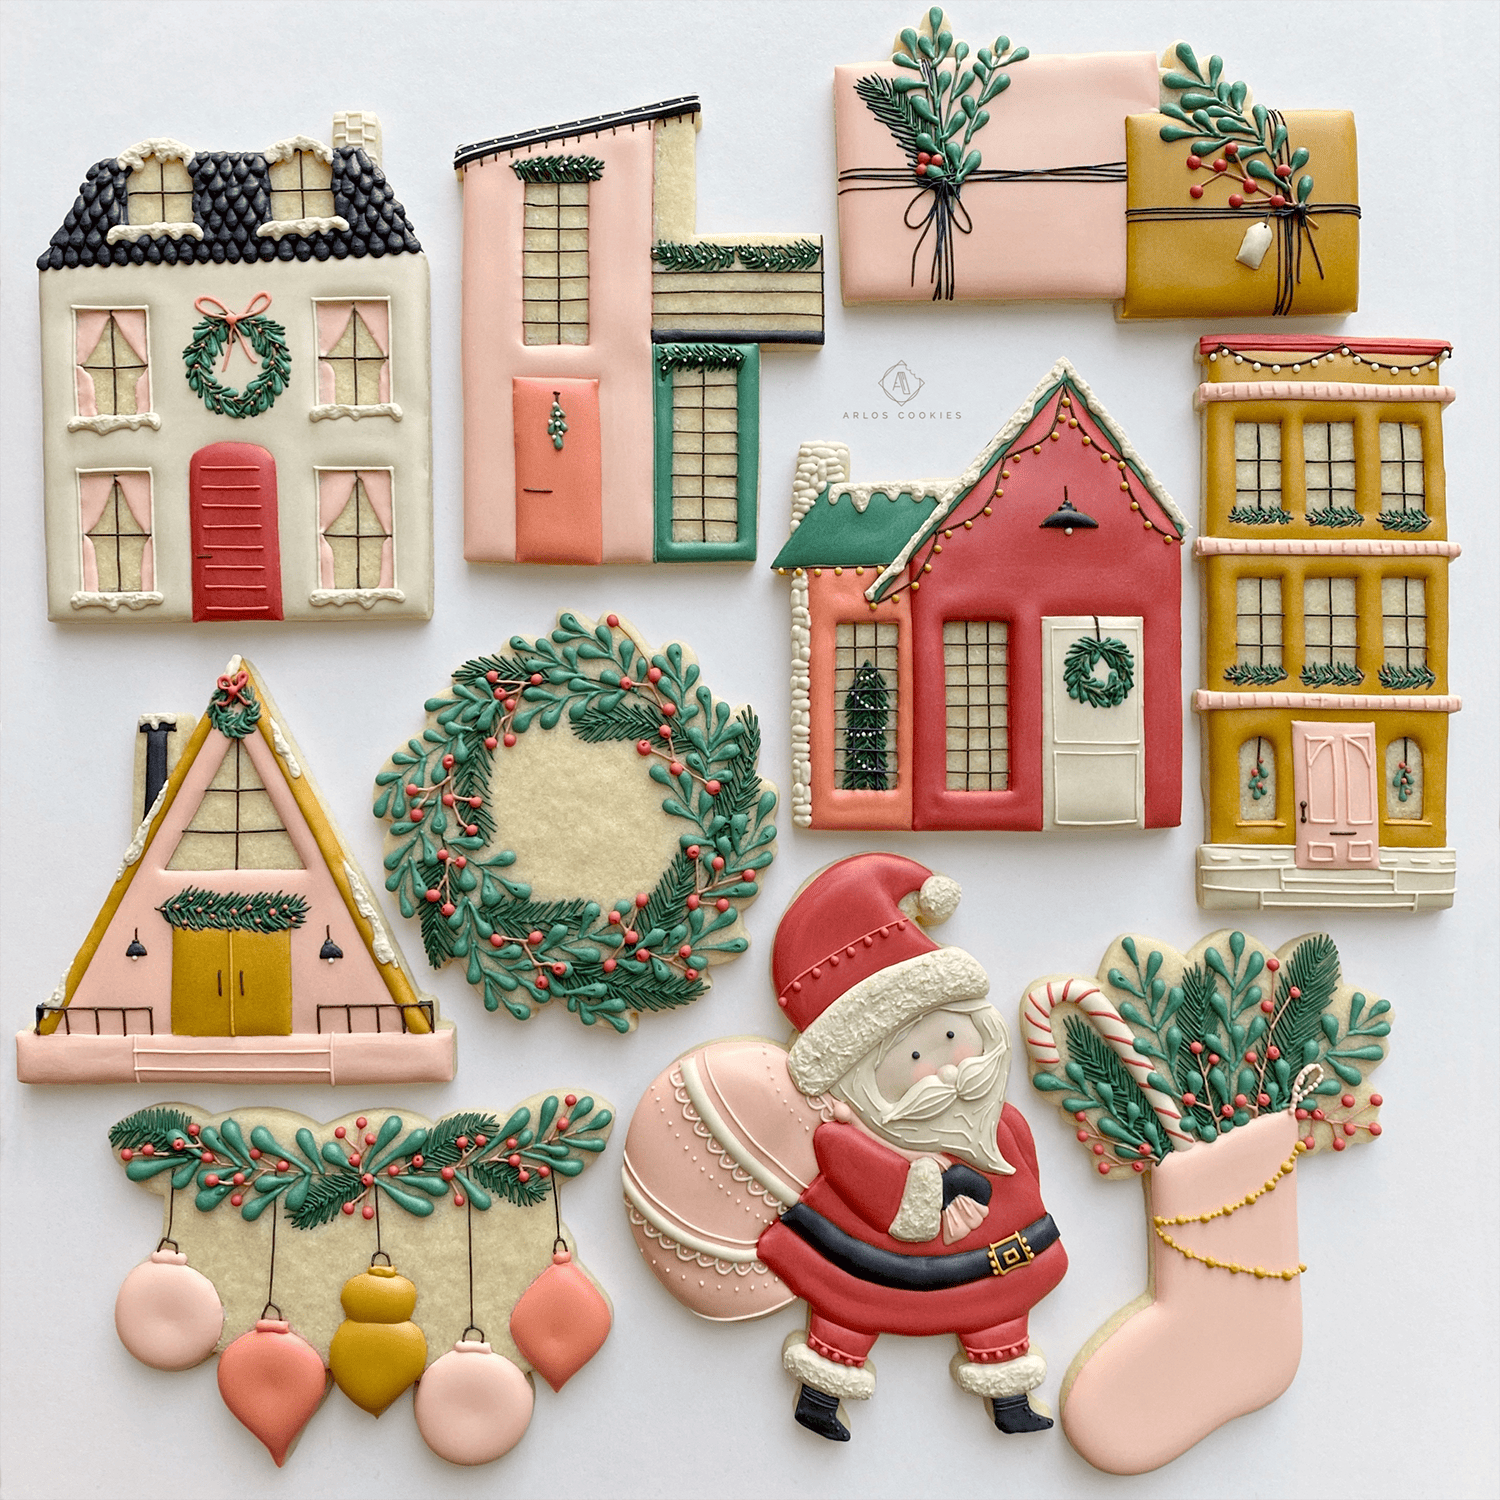 Christmas-themed decorated cookies. They're shaped like houses, presents, a wreath, a stocking, Santa Claus, and ornaments.